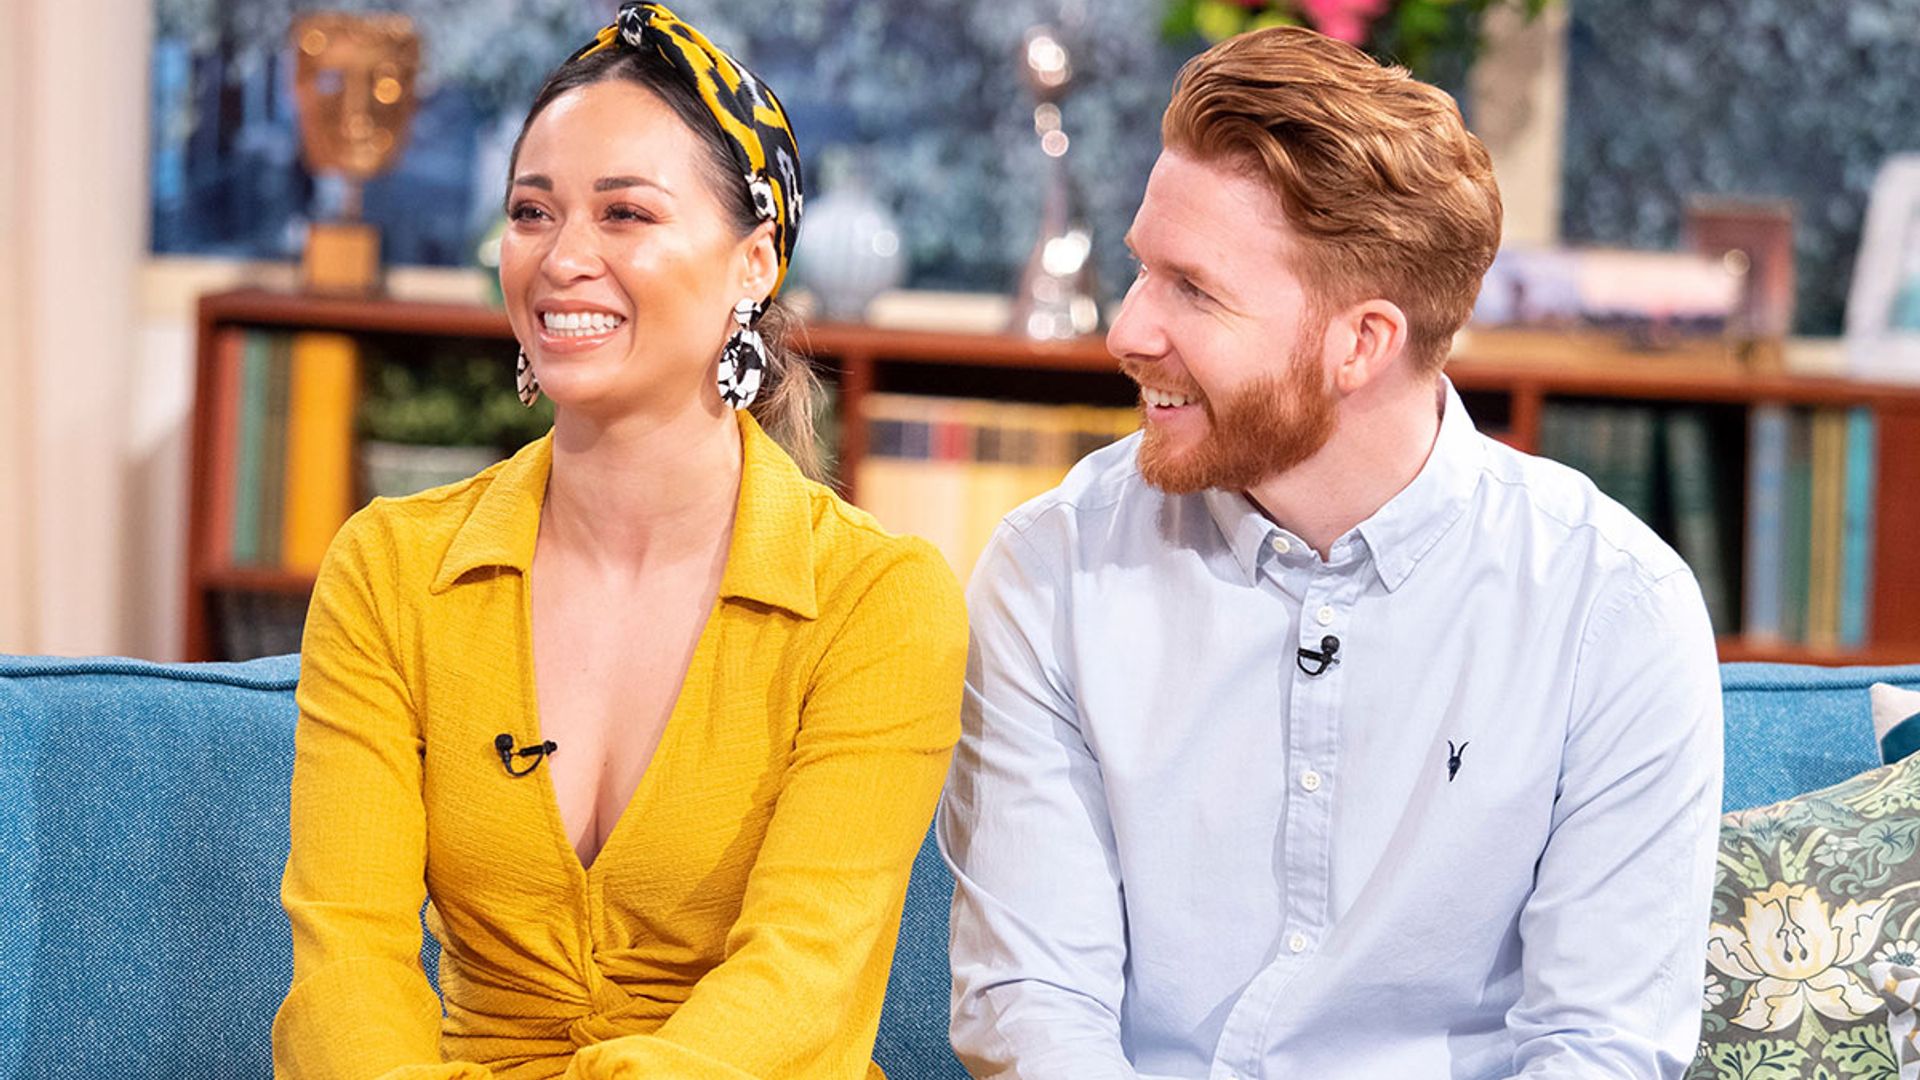 Strictly's Katya Jones has a special message for ex Neil Jones on his birthday